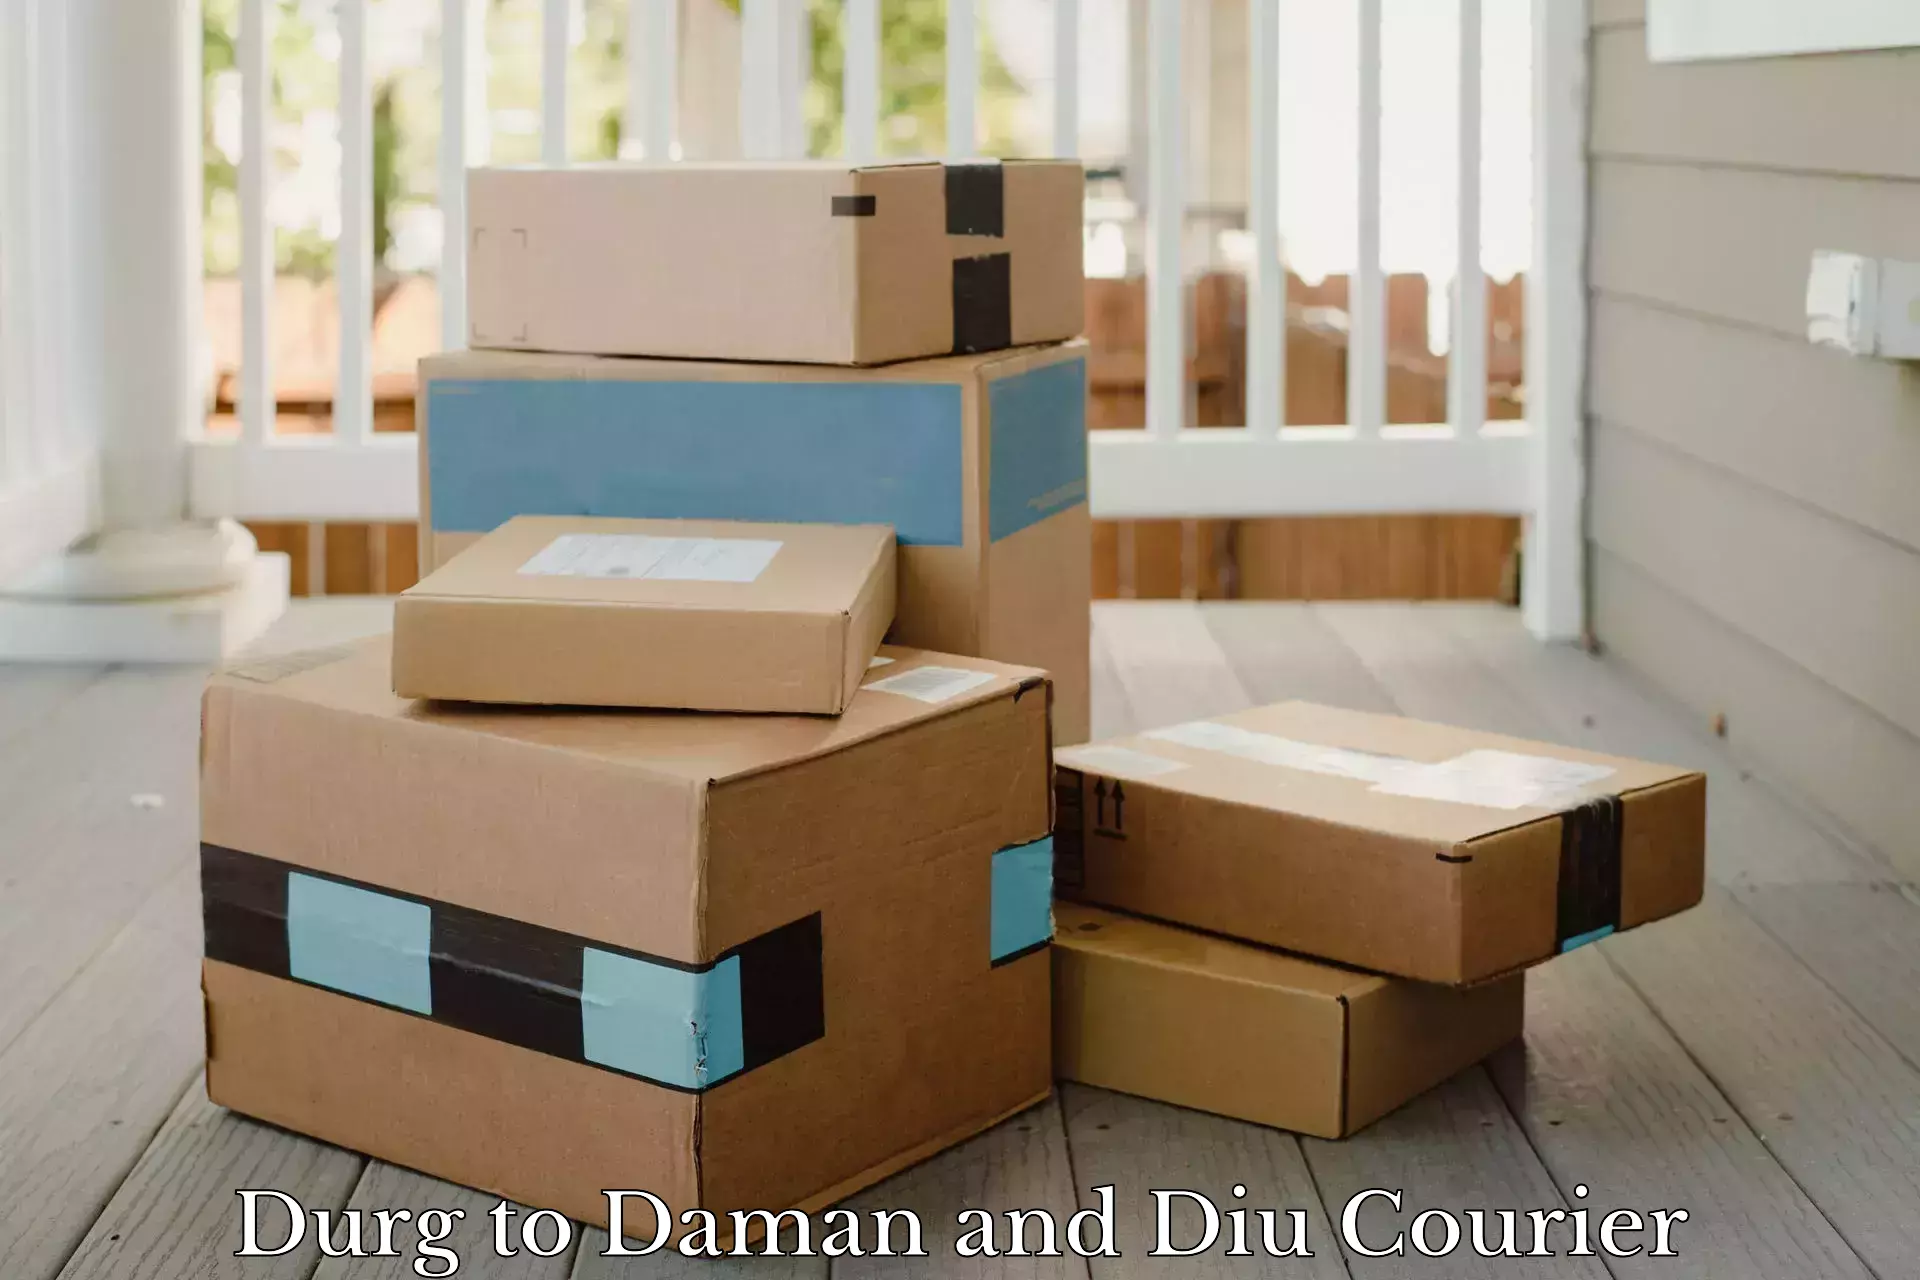 24-hour courier service Durg to Daman